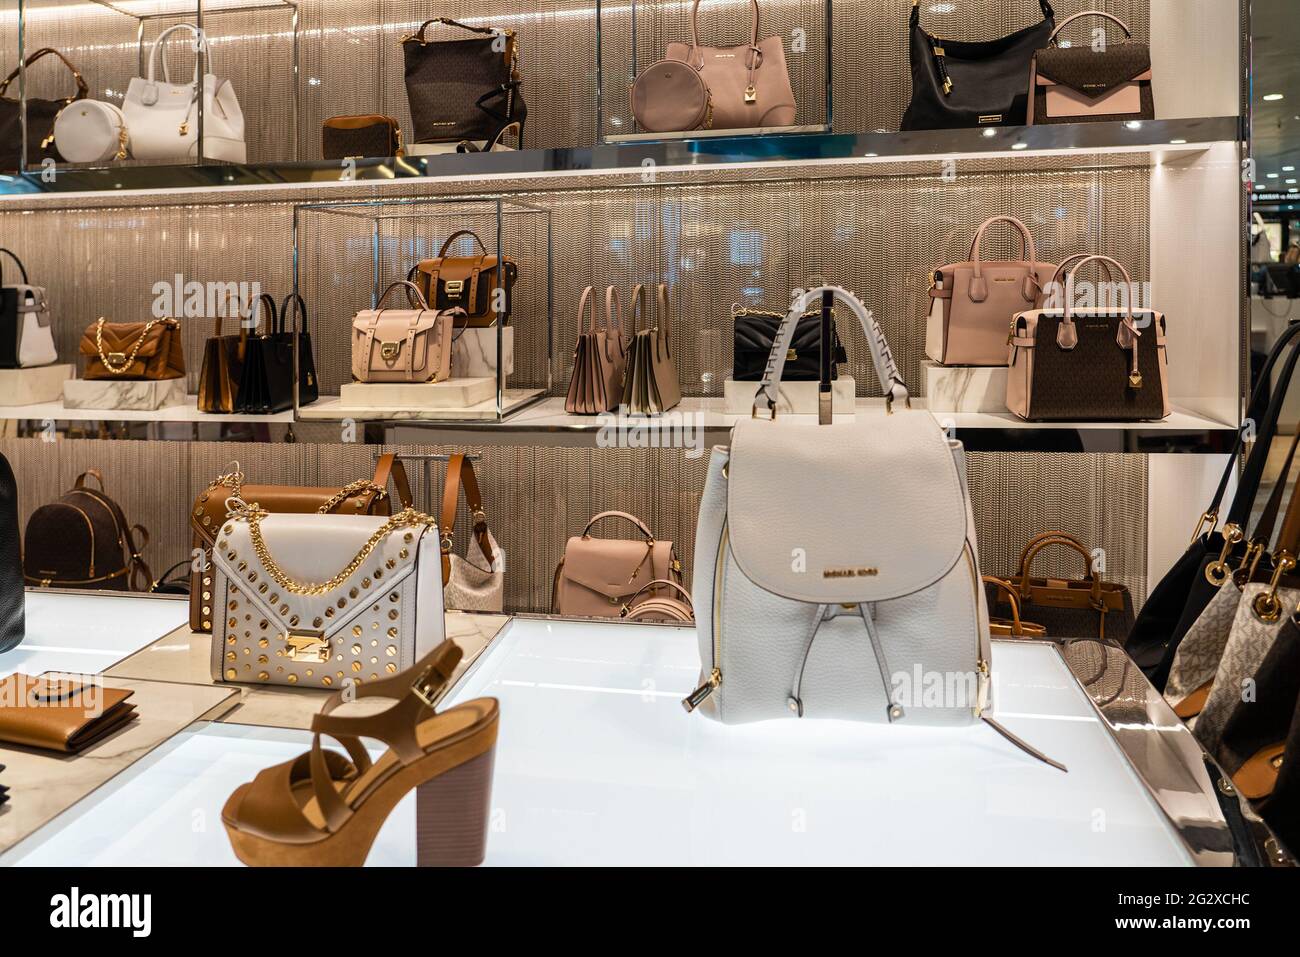 American fashion label called Michael Kors with its store front, selling  luxurious items and handbags. Istanbul/ Turkey - April 2019 Stock Photo -  Alamy